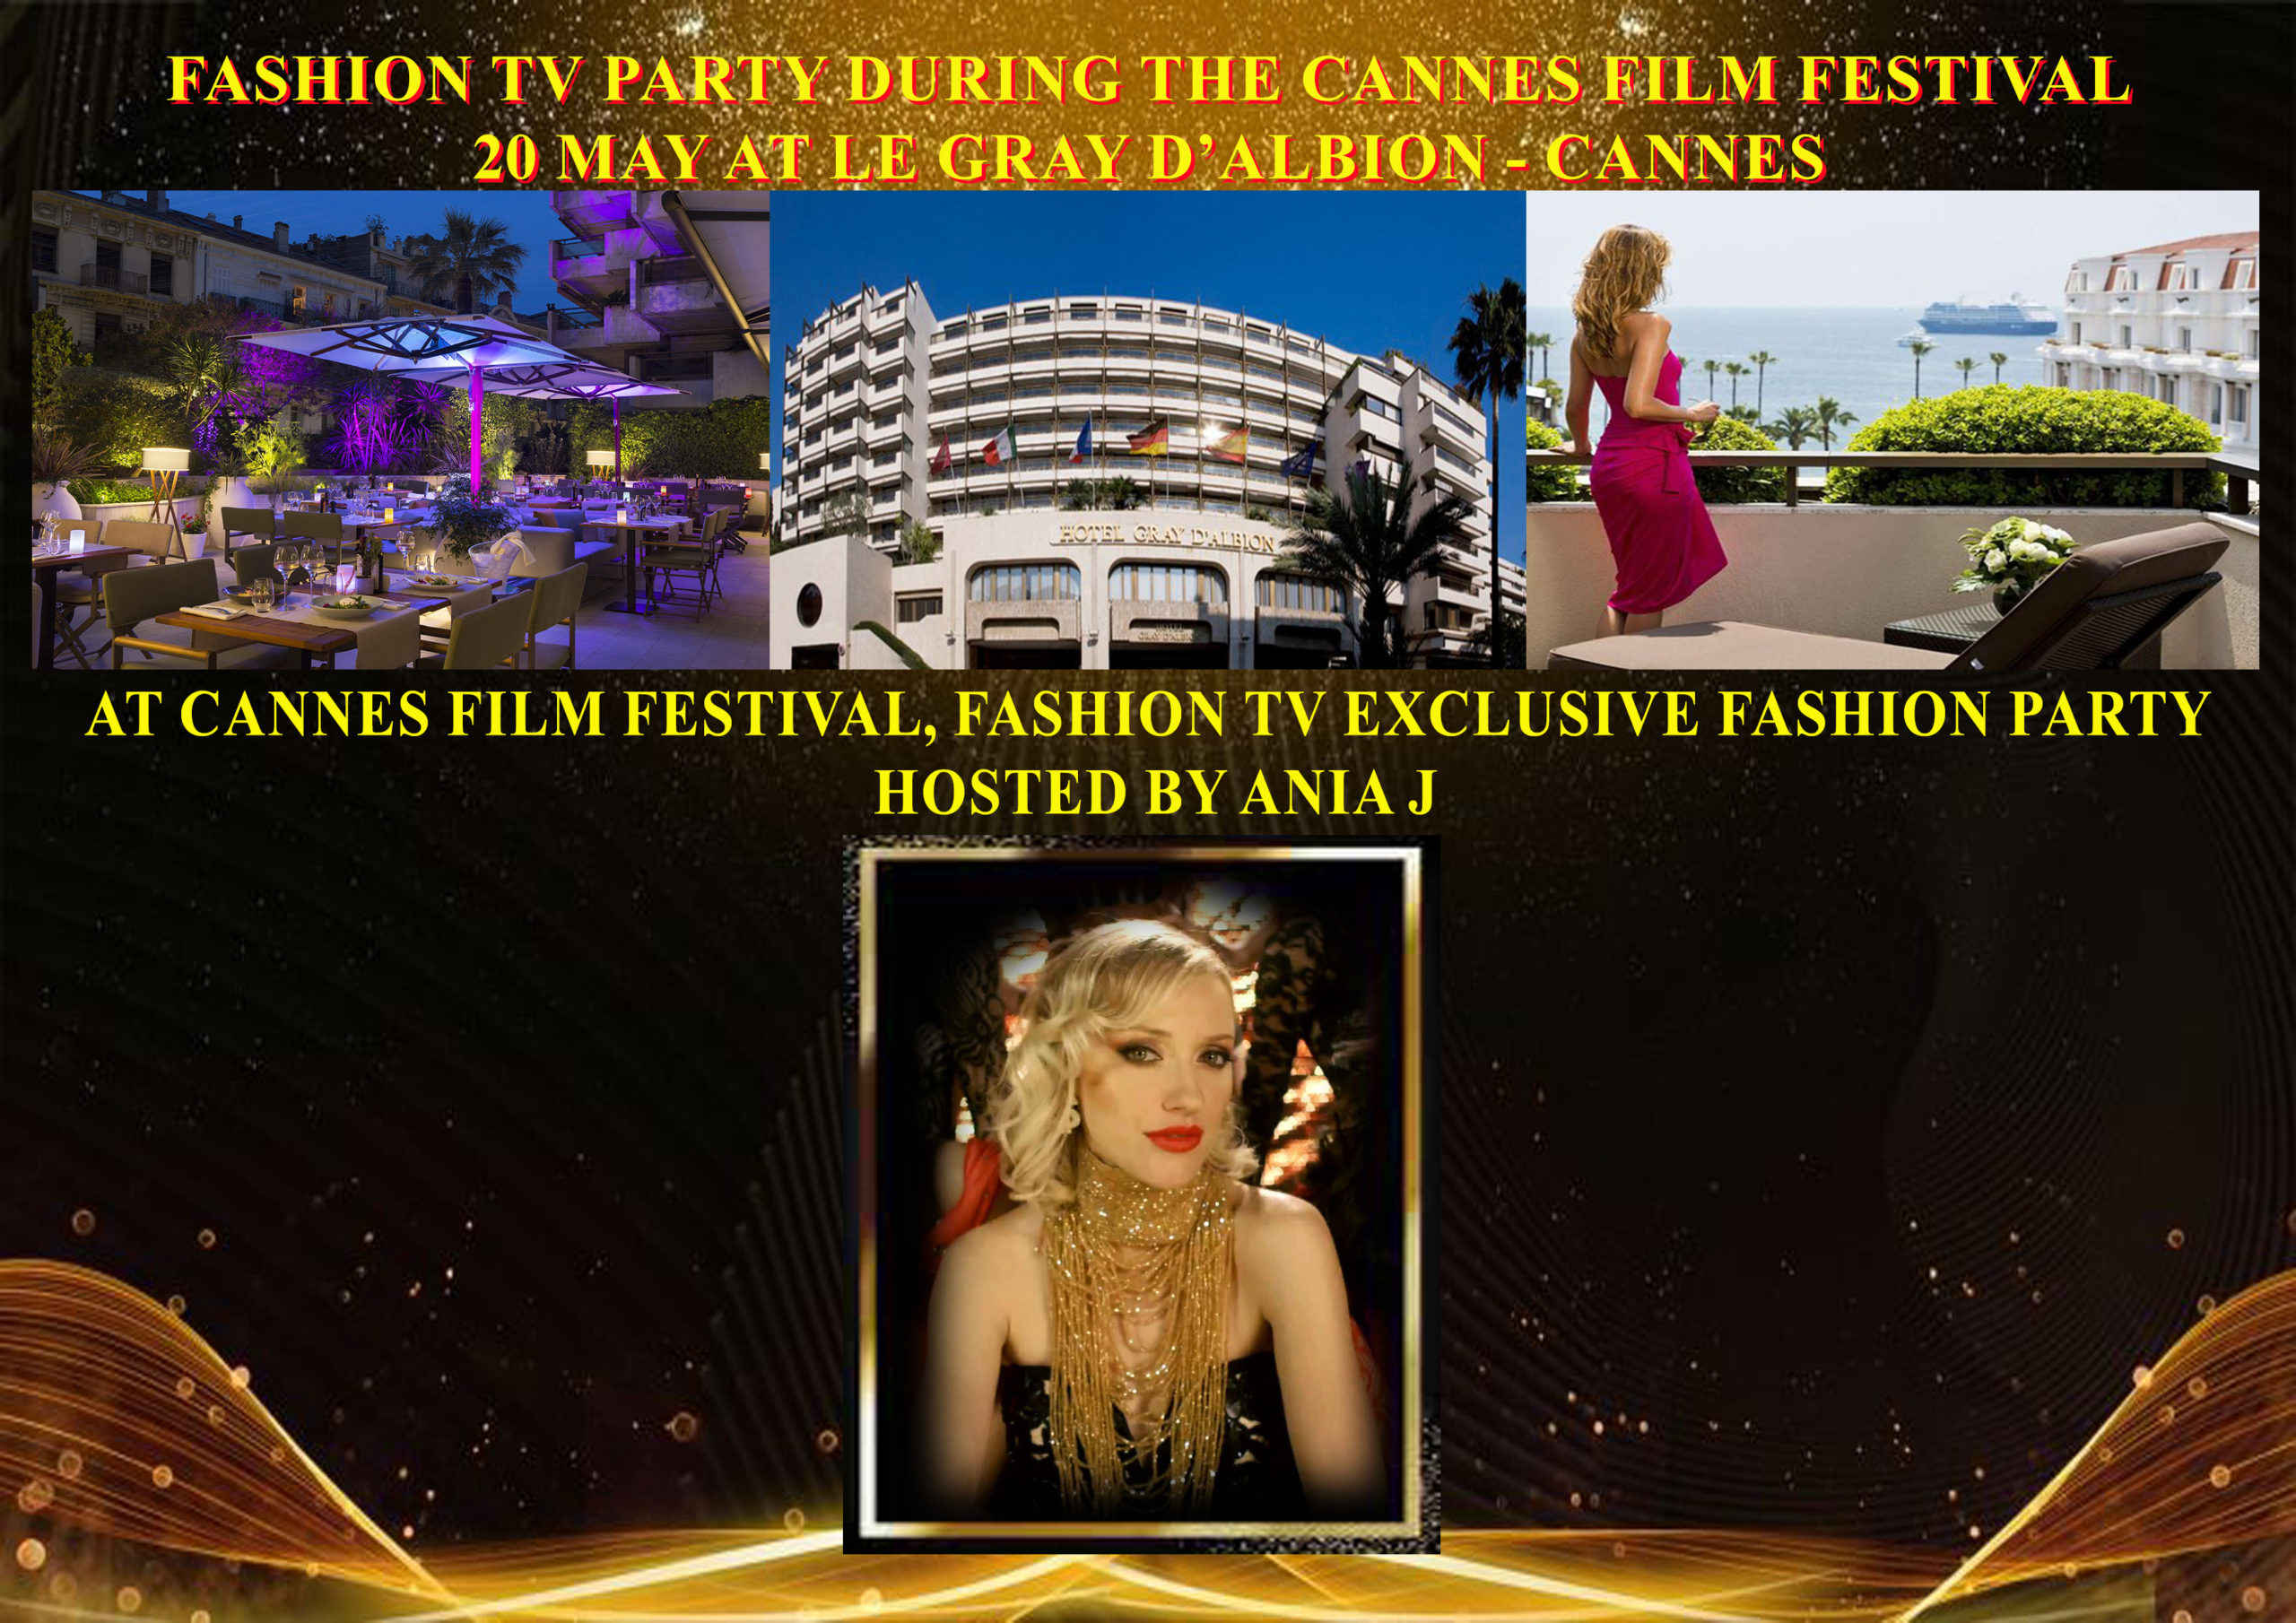 AS VOGUE COVER-AEFW - IN PARTNER WITH FASHION TV-OFFICIAL FASHION PARTY SHOW IN CANNES-Venue LE GRAY D'ALBION-DN-AFRICA MEDIA PARTNER